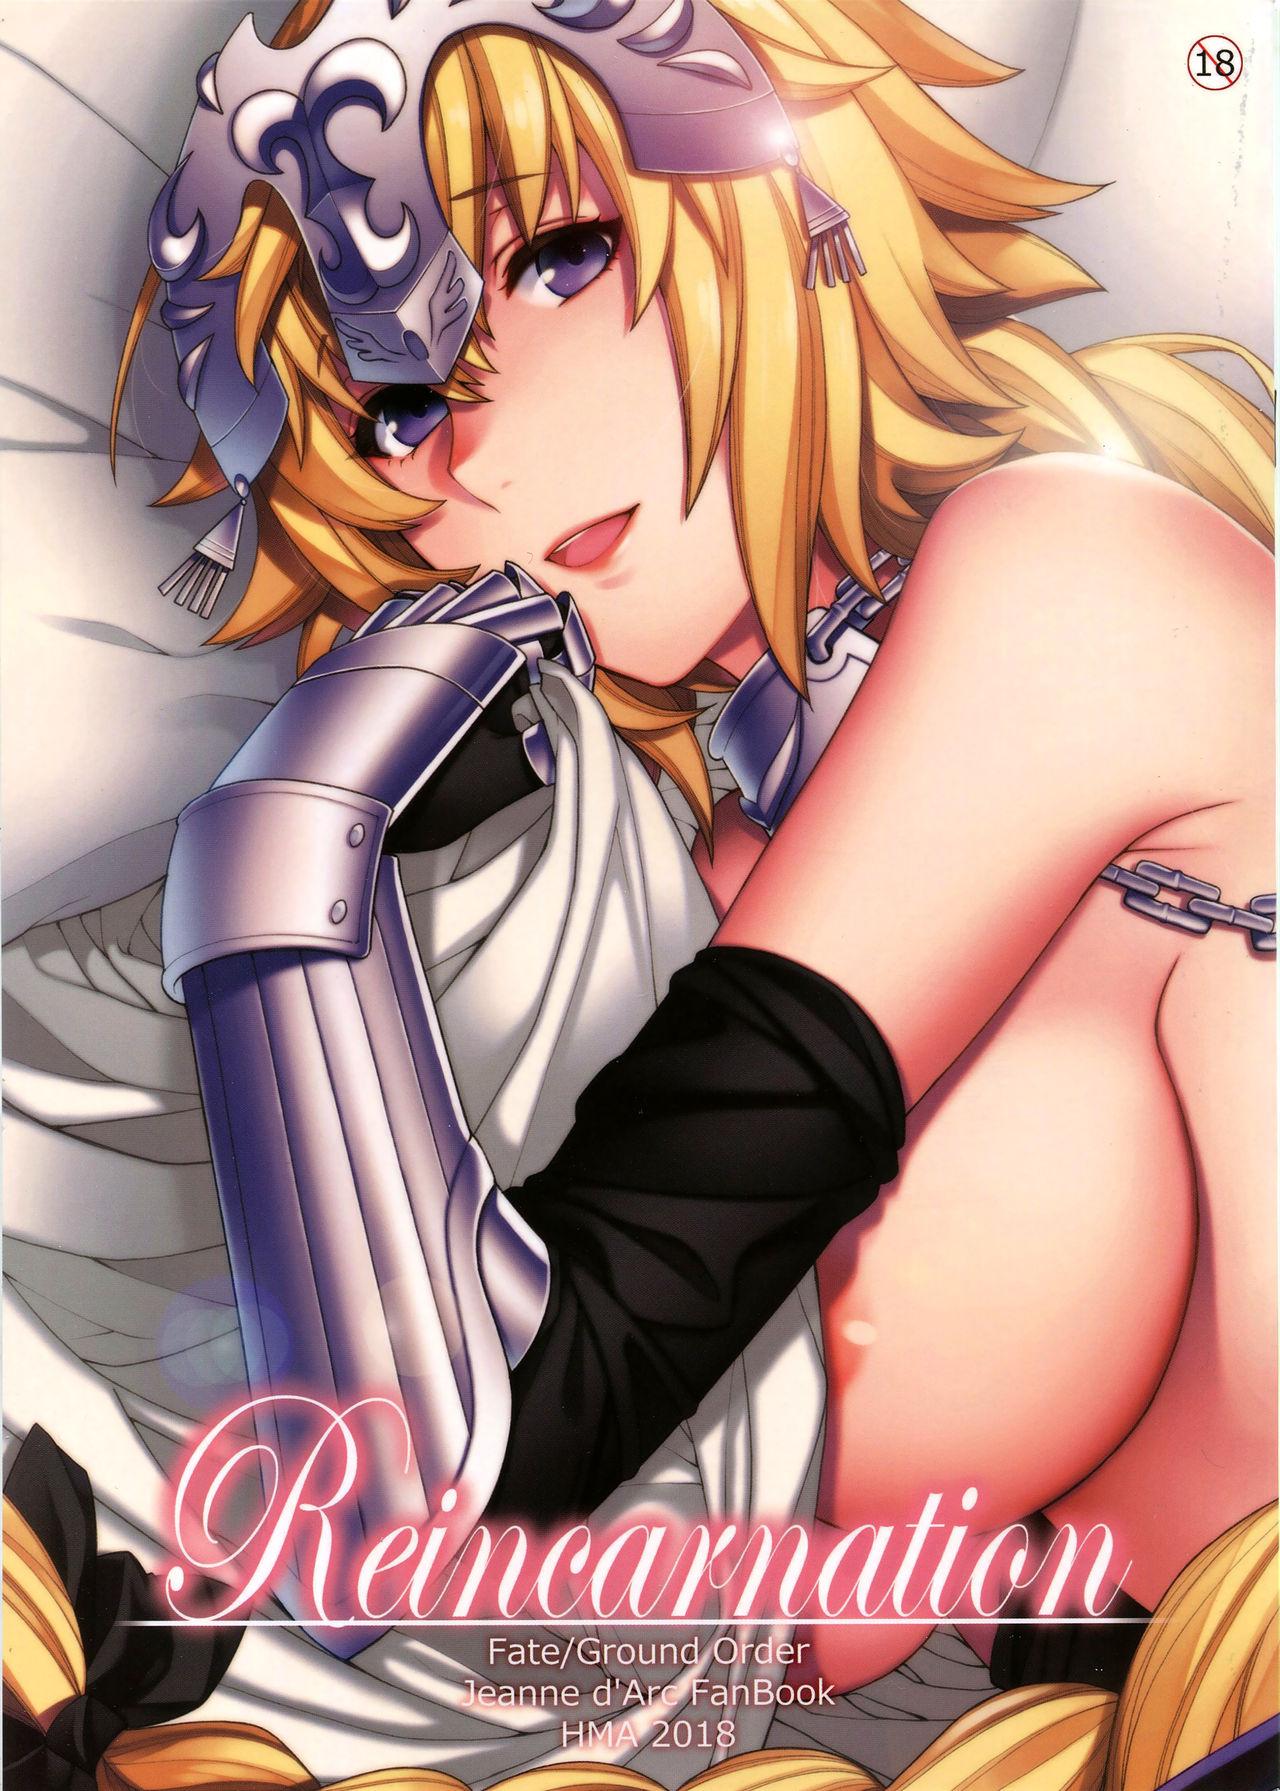 Stroking Reincarnation - Fate grand order Huge Boobs - Picture 1